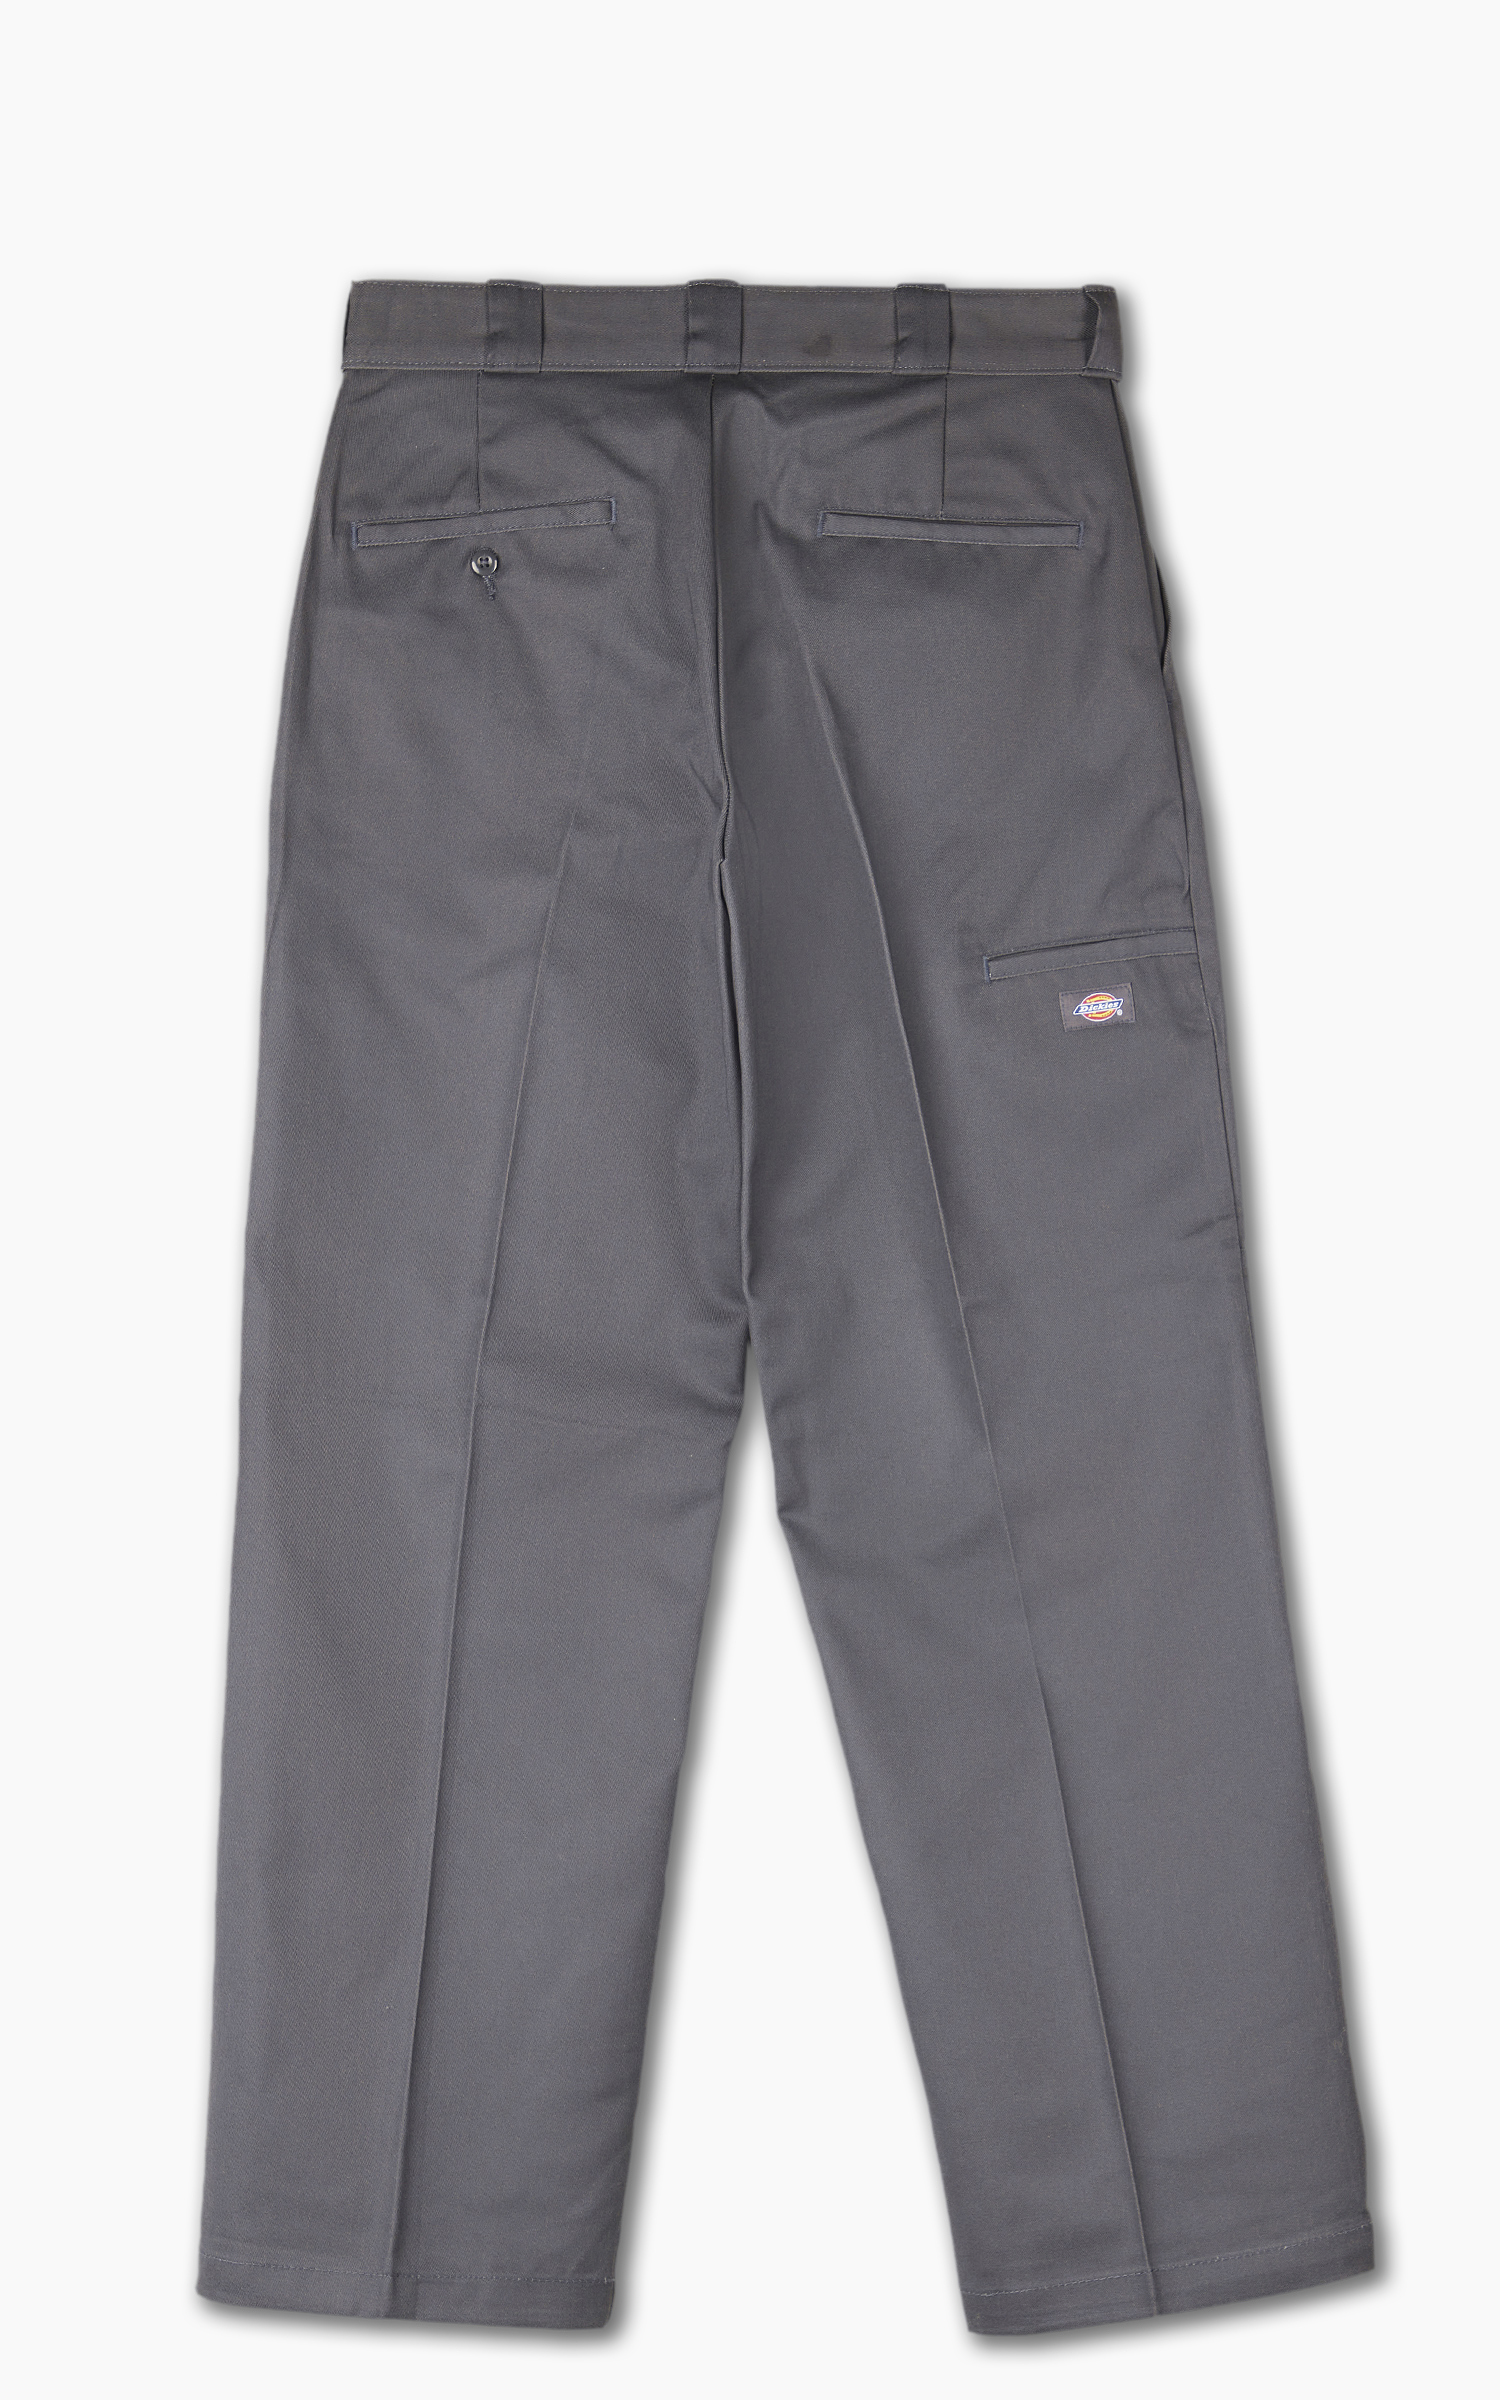 Dickies Double Knee Work Pant Charcoal Grey | Cultizm